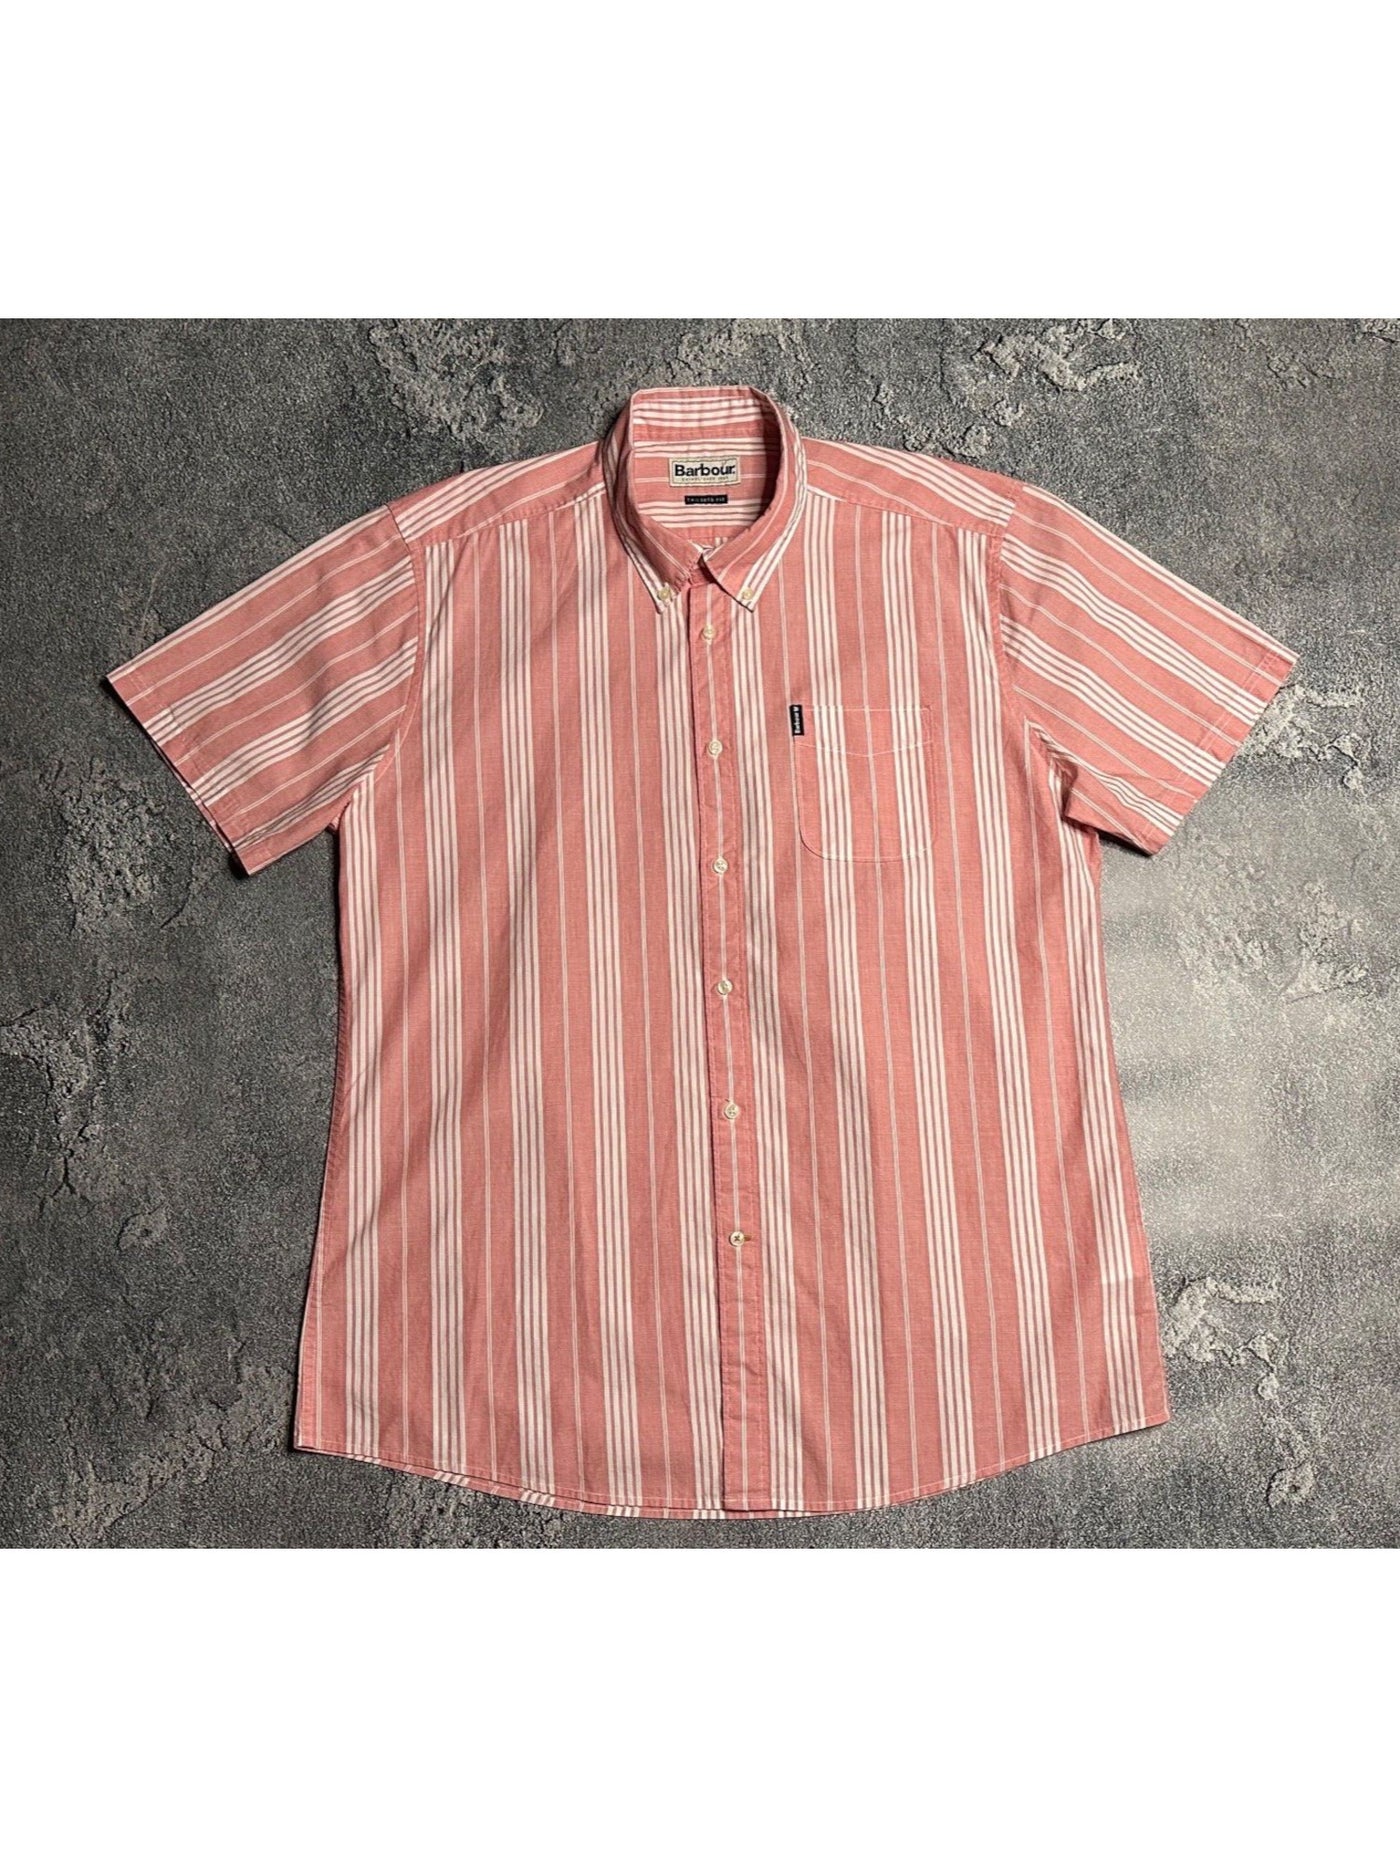 BARBOUR Mens Pink Striped Short Sleeve Button Down Casual Shirt XL